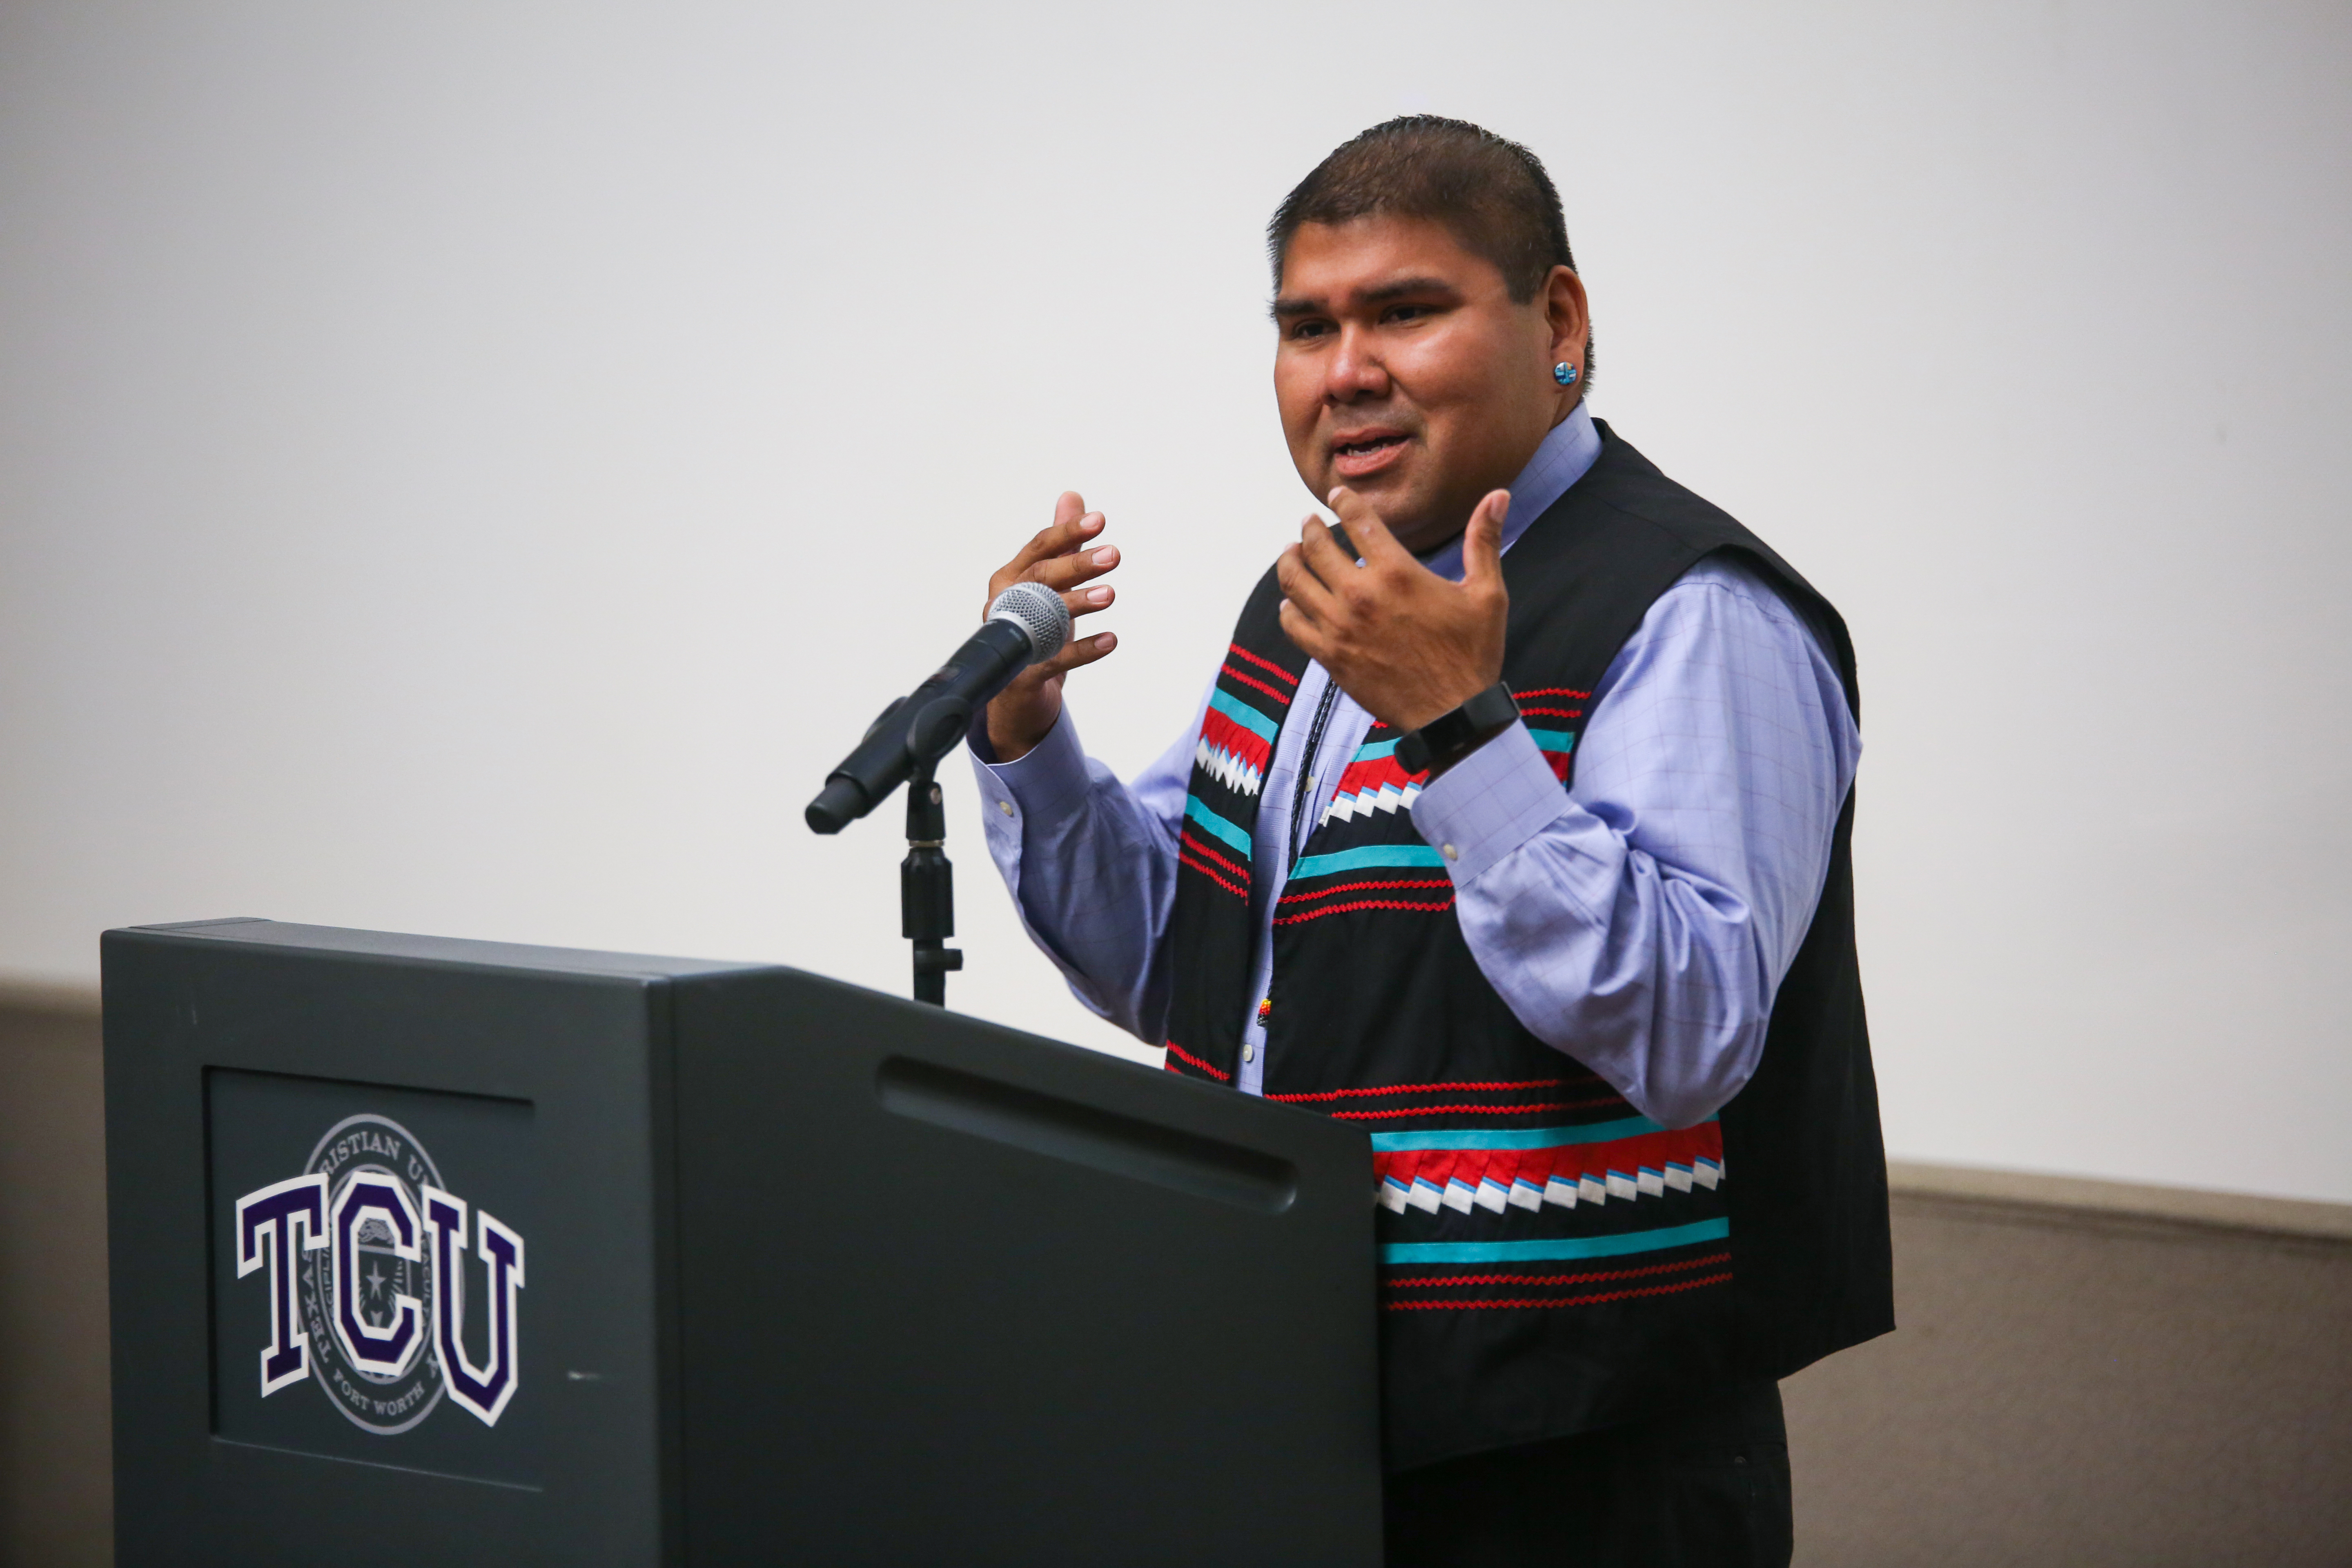 Seminole Nation member Chebon Kernell speaks at the dedication ceremony for TCU's Native American monument, October 15, 2018. Kernell serves as Executive Secretary of the United Methodist Church's Native American Ministries. Photo by Amy Peterson